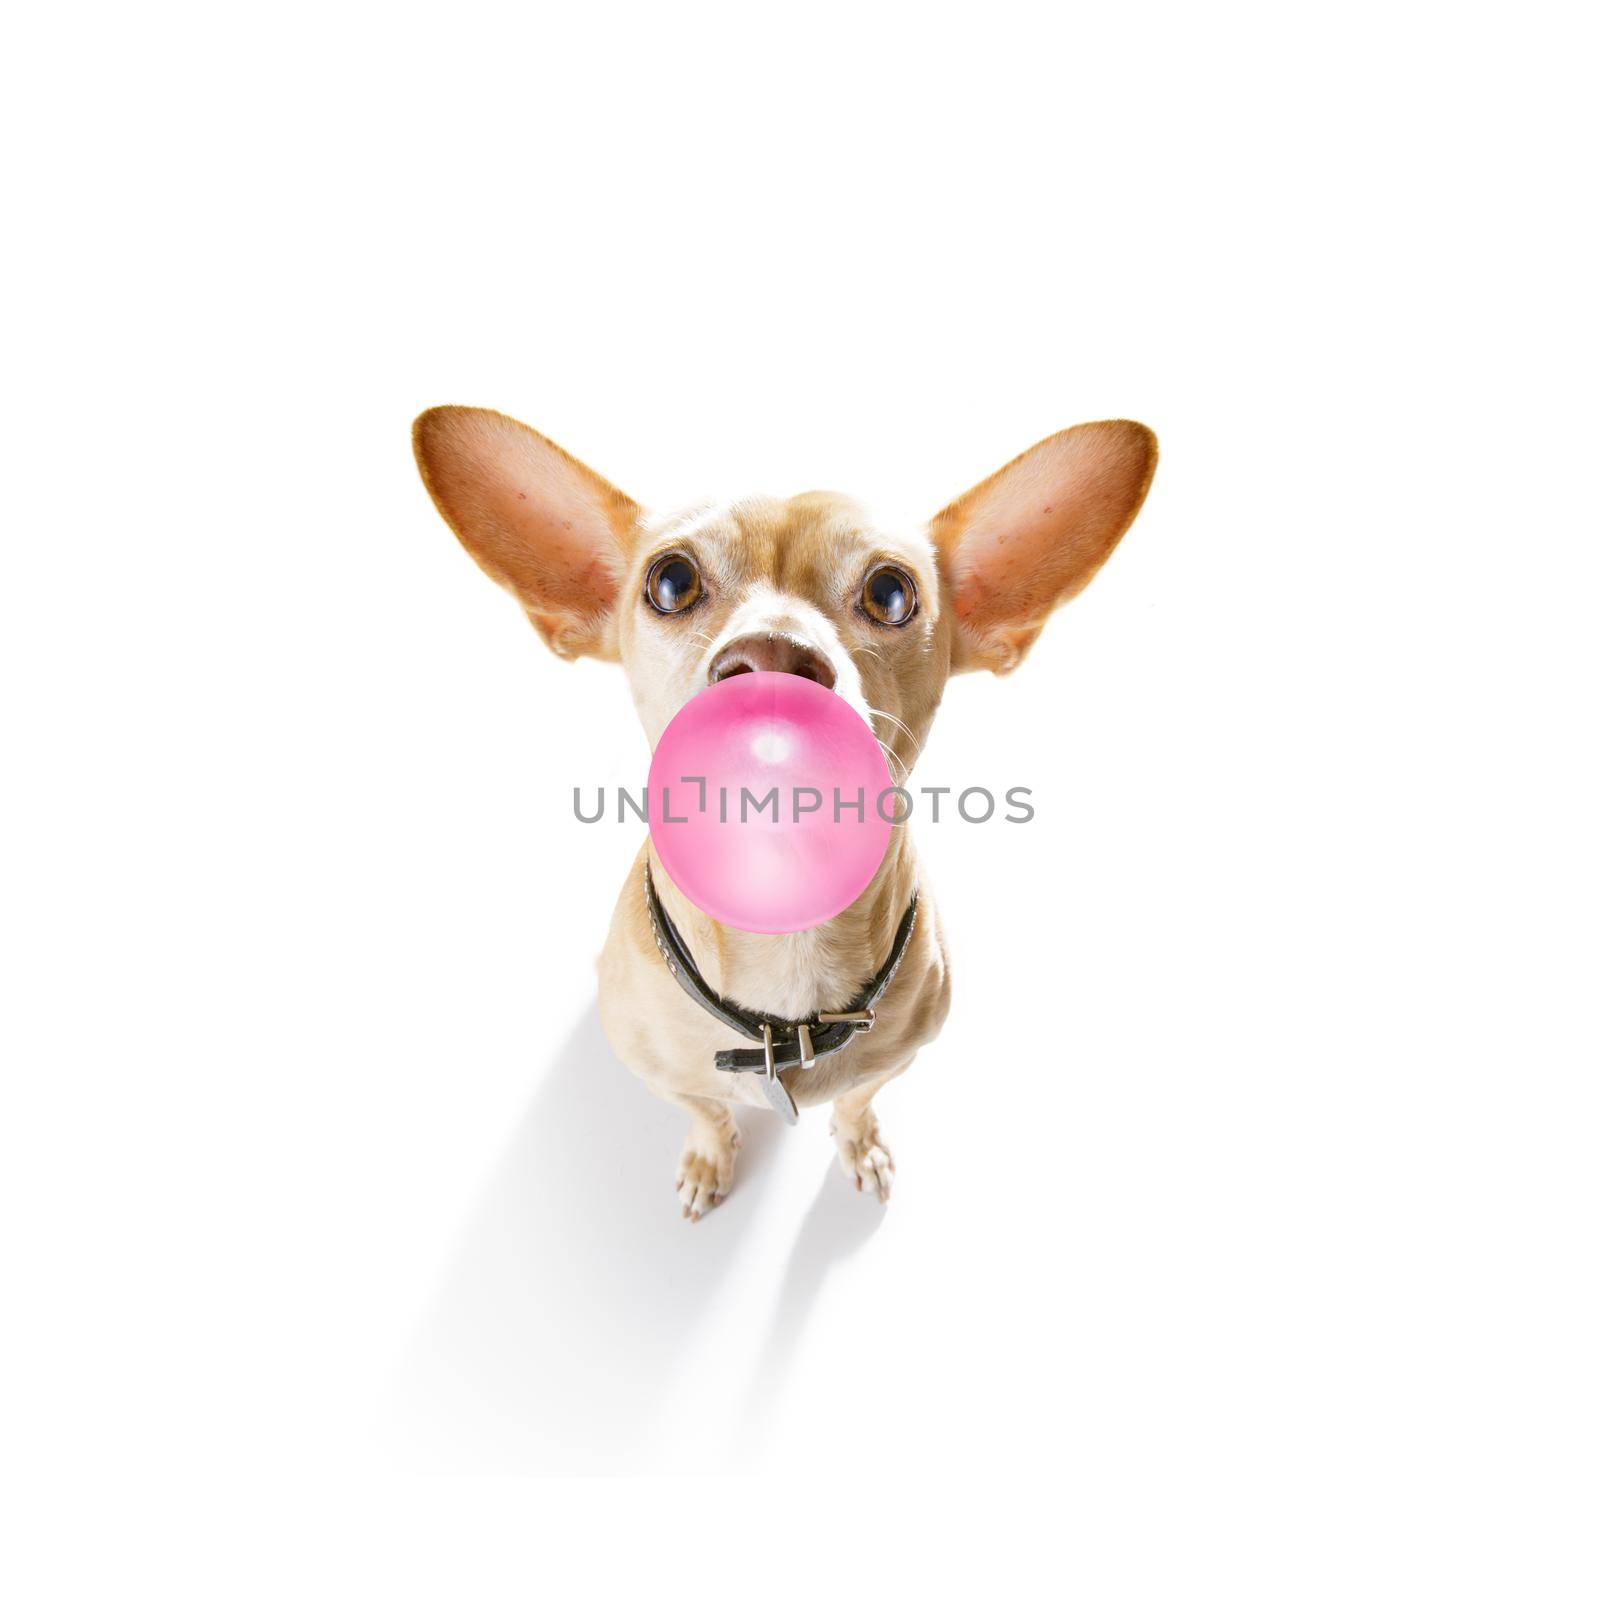 curious chihuahua dog  looking up to owner waiting or sitting patient to play or go for a walk with  chewing bubble gum ,   isolated on white background